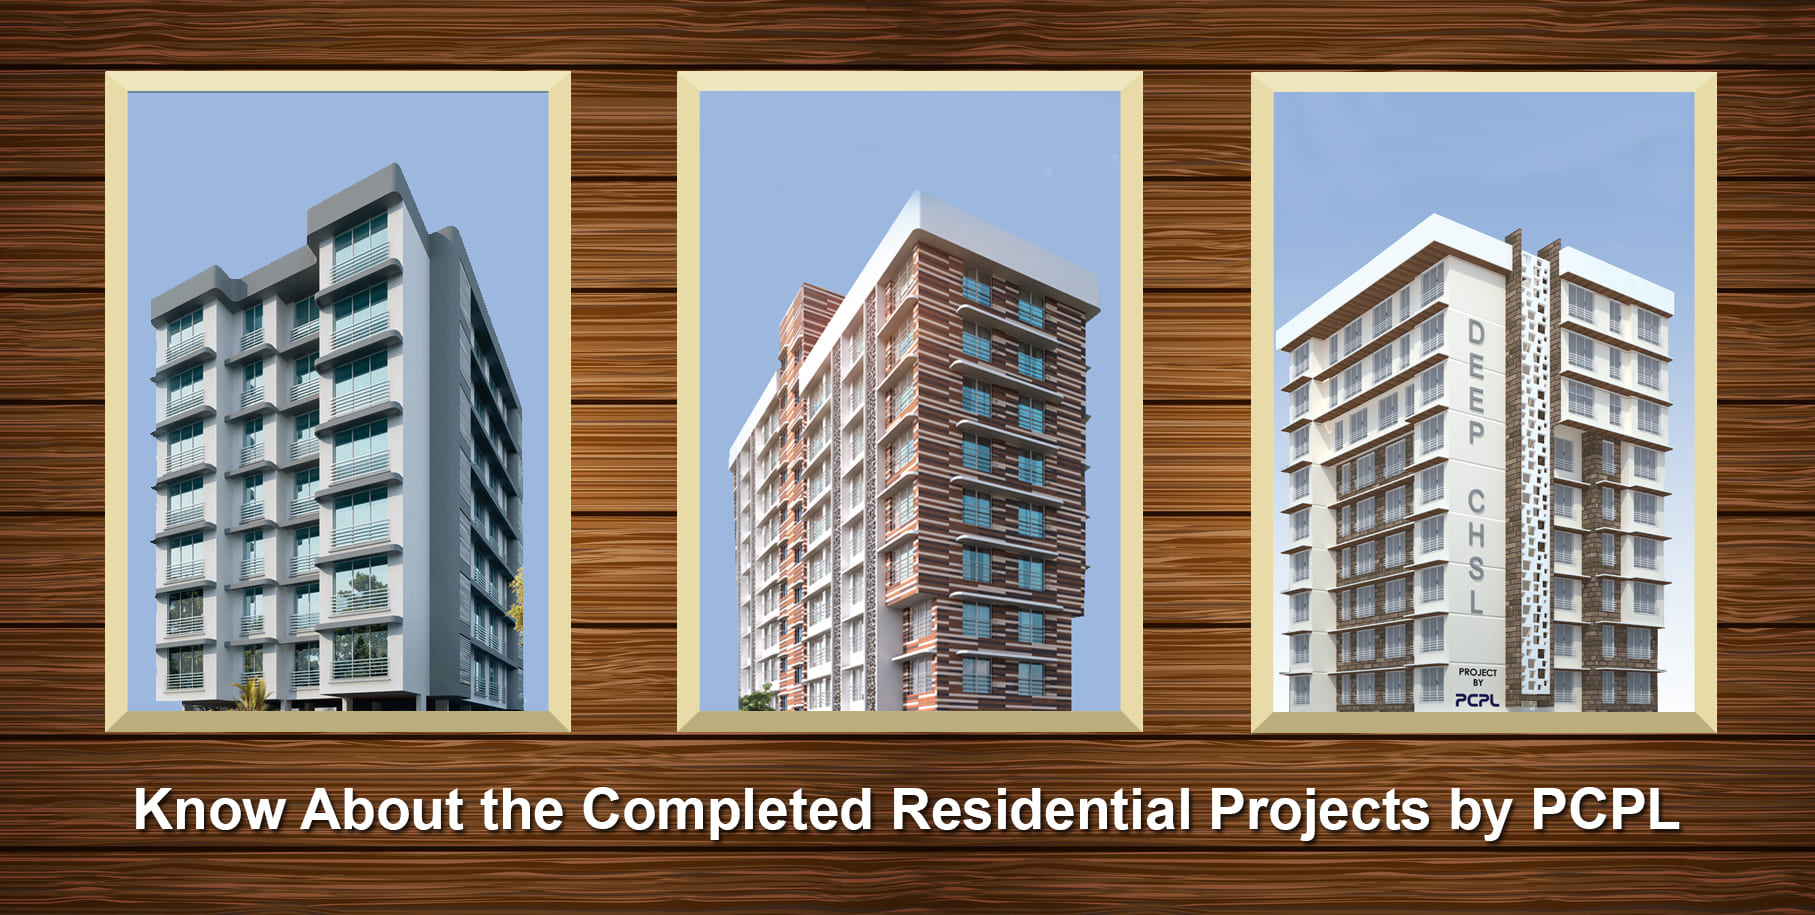 Know About the Completed Residential Projects by PCPL